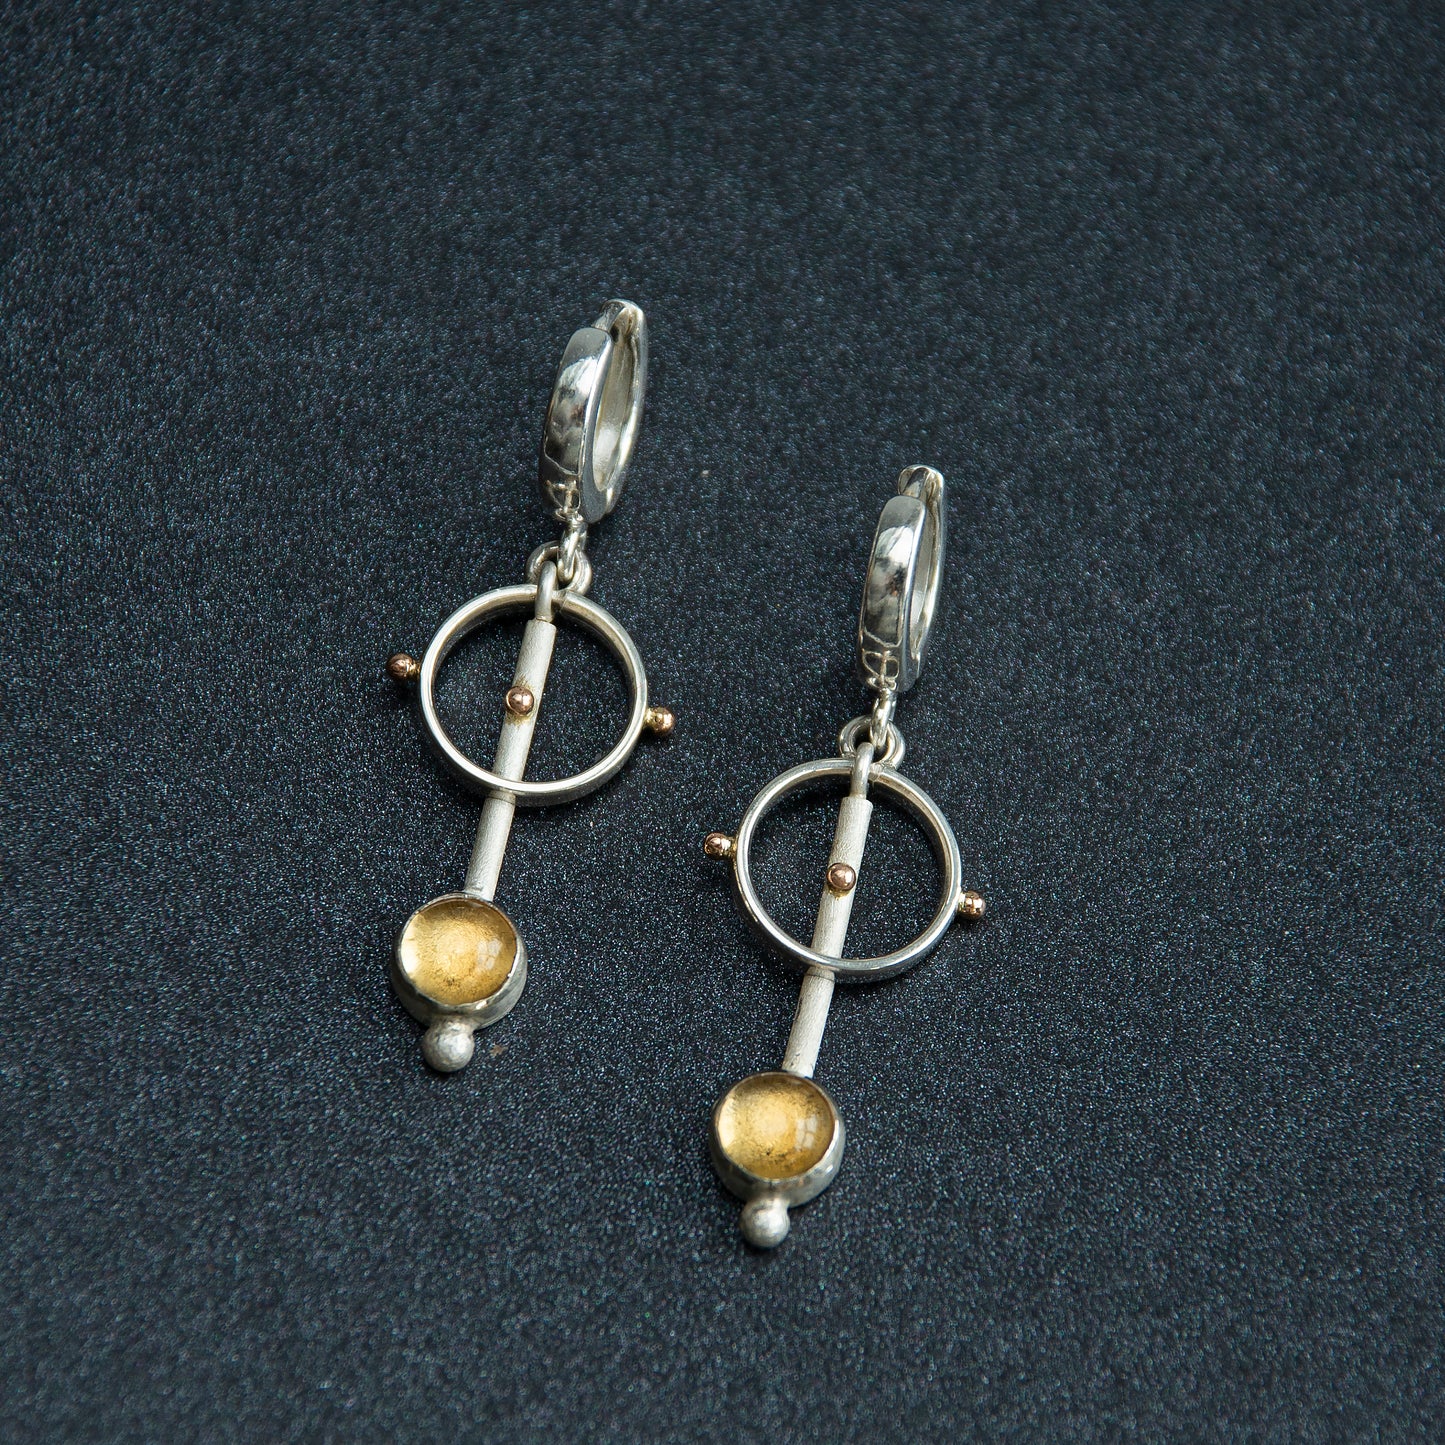 Long Drop Minimalist Earrings With Citrine Stone And Gold Beads